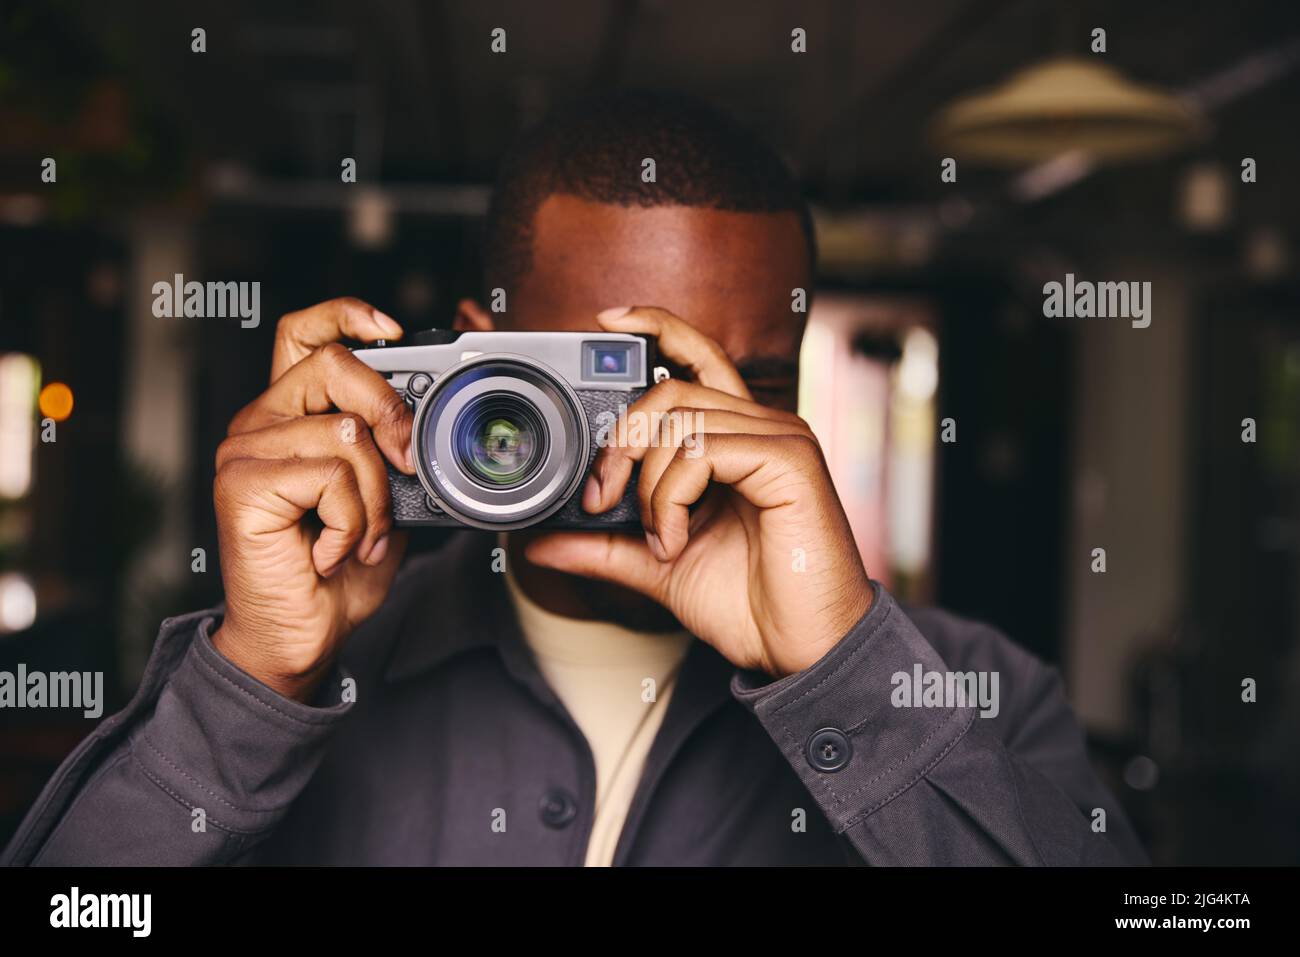 Photographer Taking A Picture With Camera Looking Through Lens Stock Photo